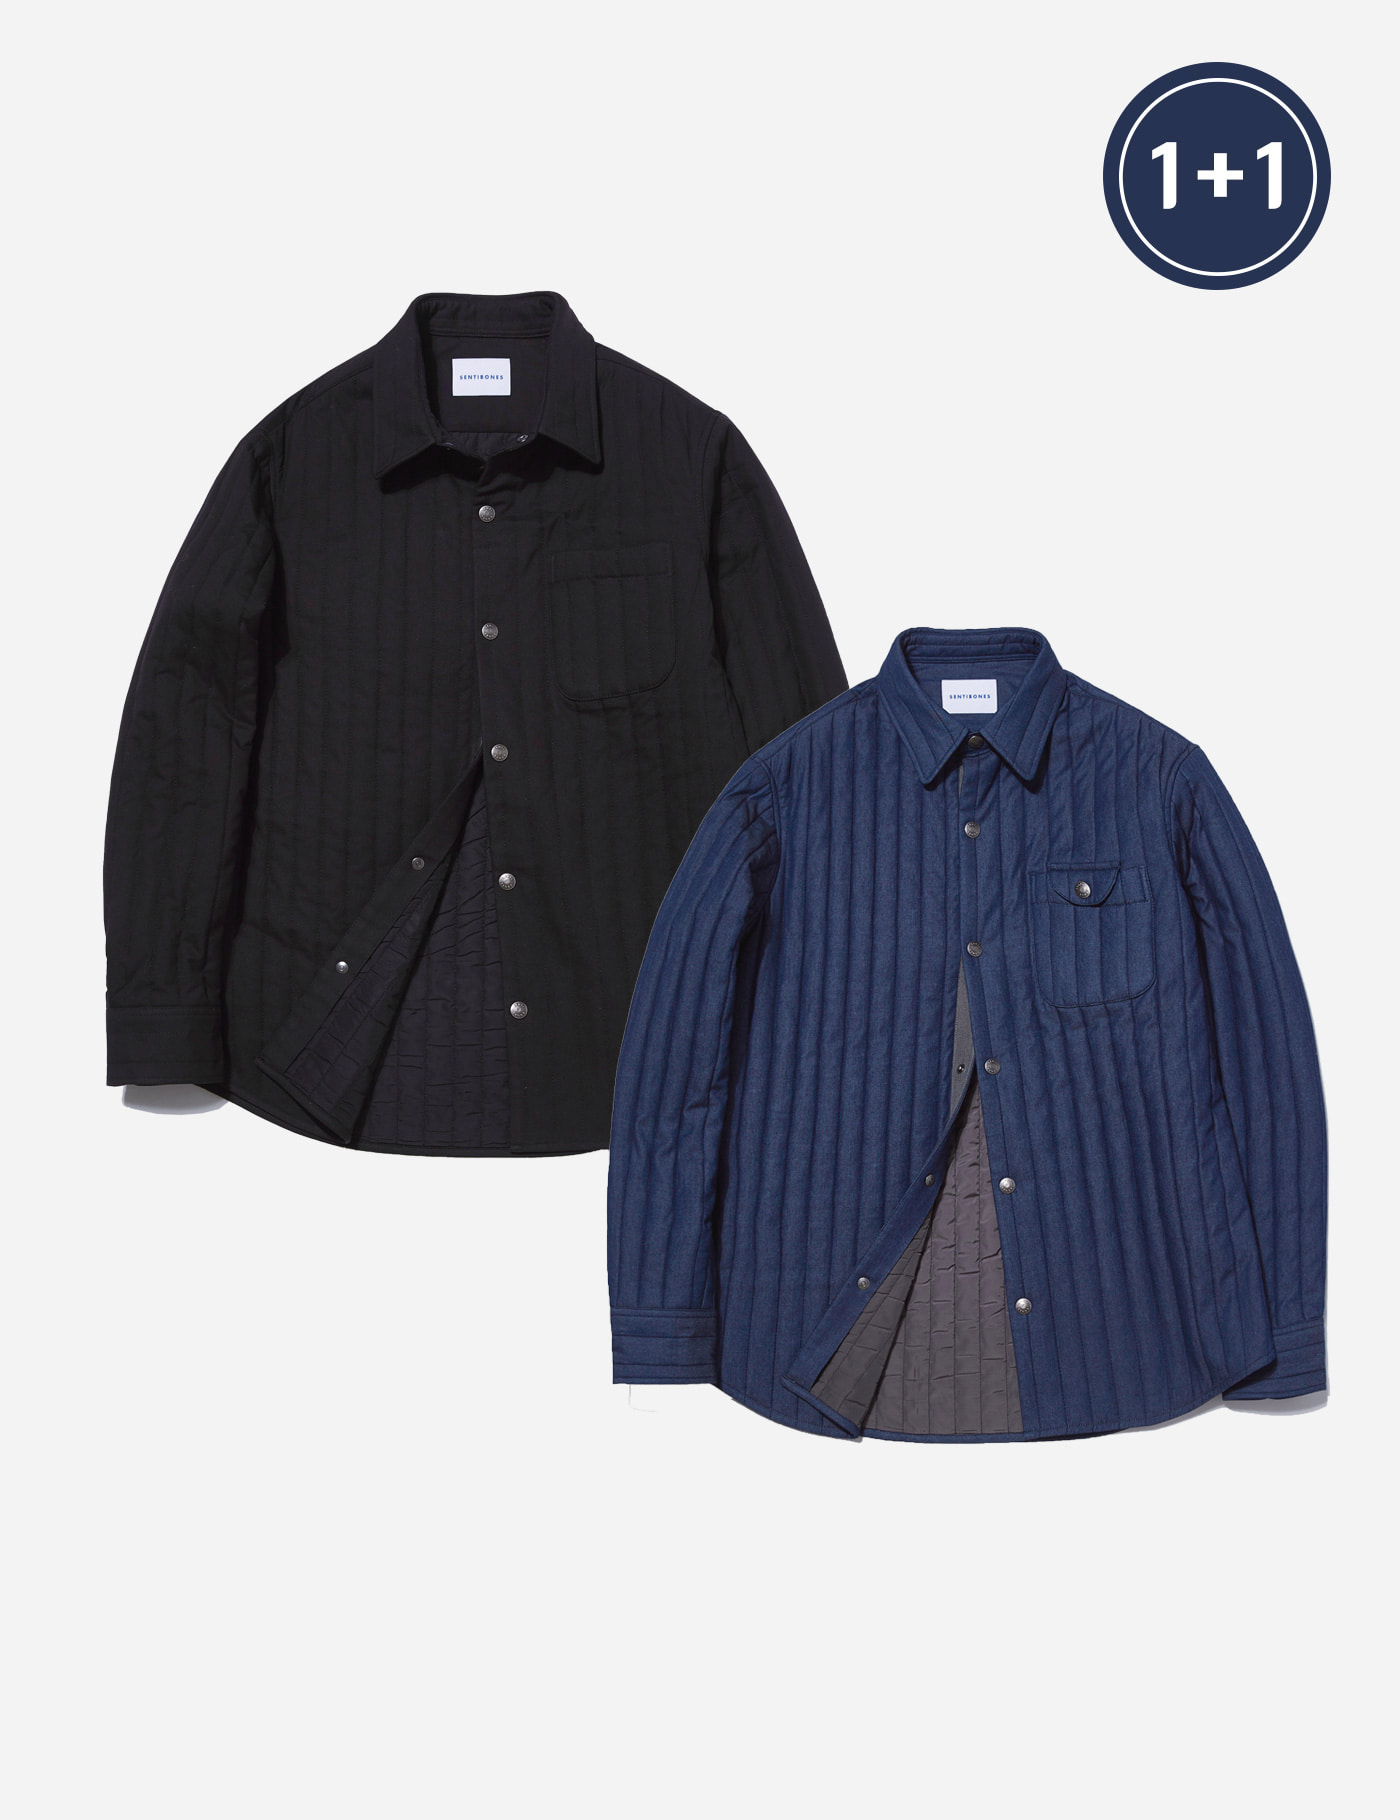 [1+1] QUILTED SHIRTS